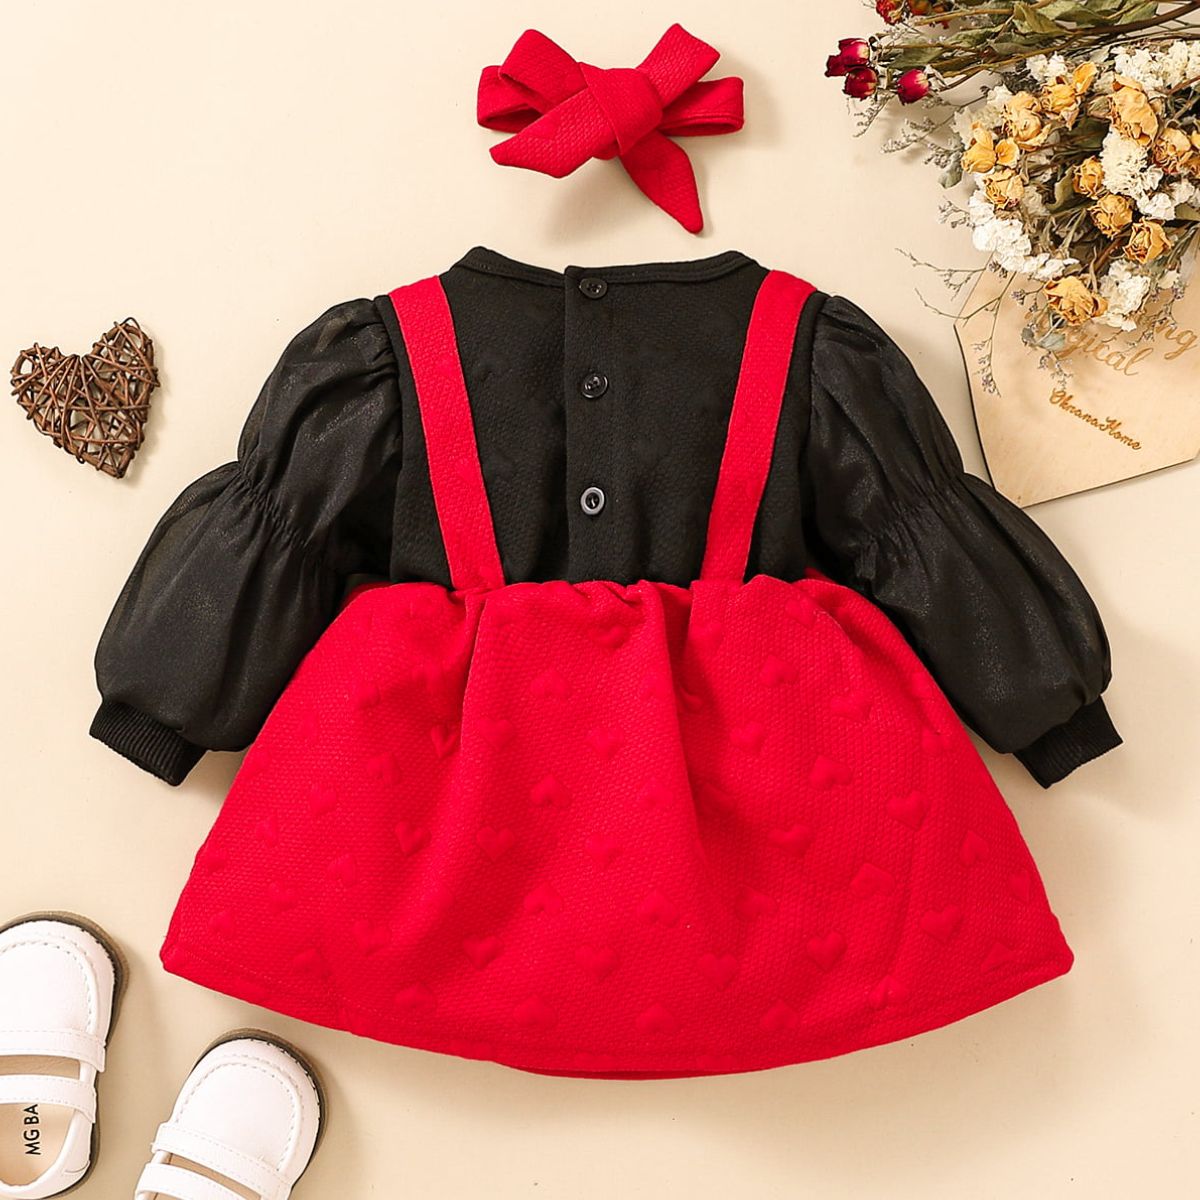 Baby Girl Two-Tone Bow Detail Dress, Sizes 6M - 18M